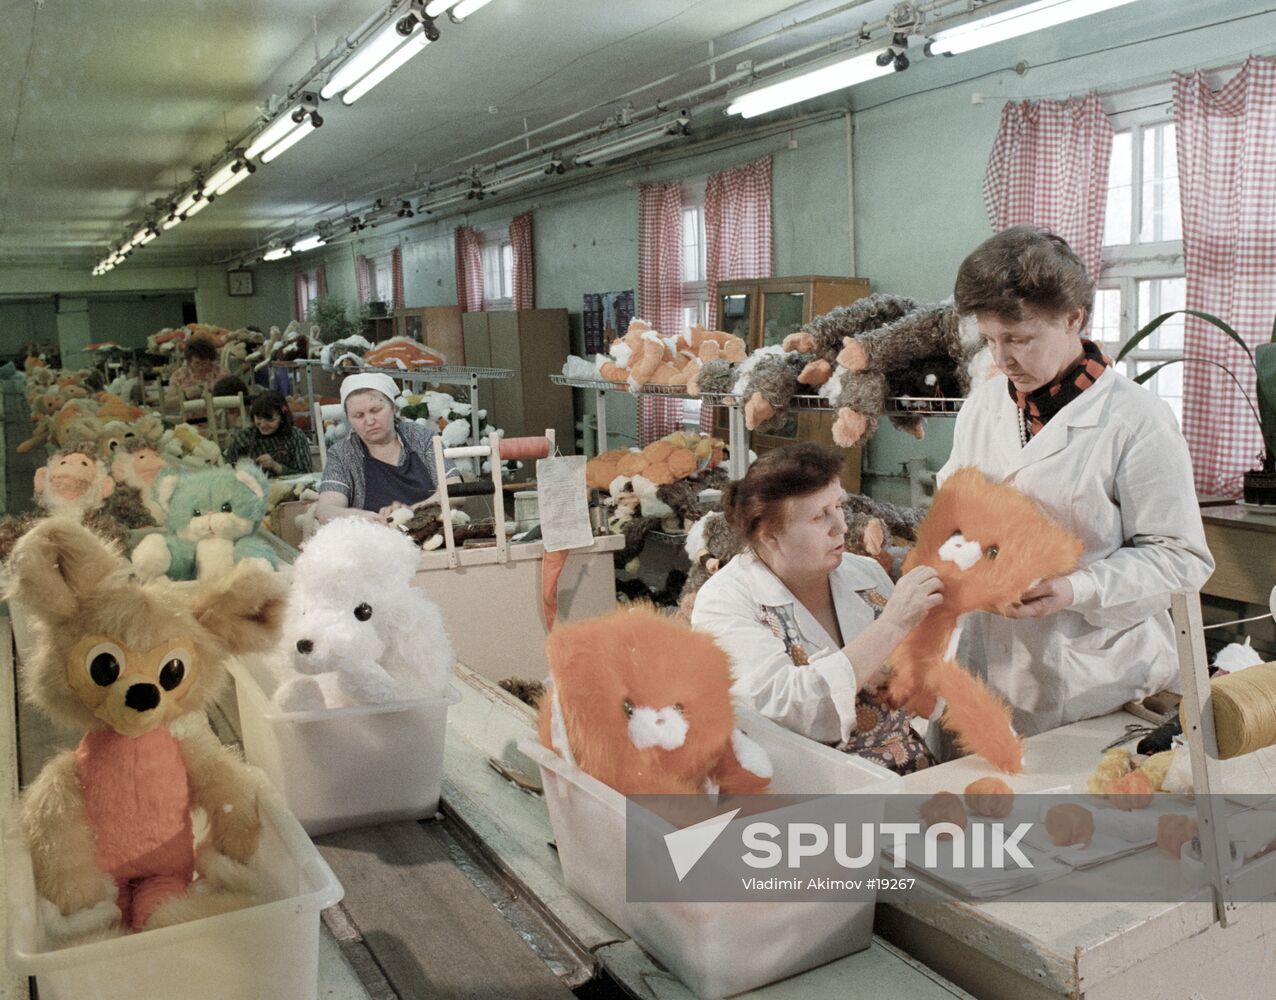 MOSCOW TOY FACTORY